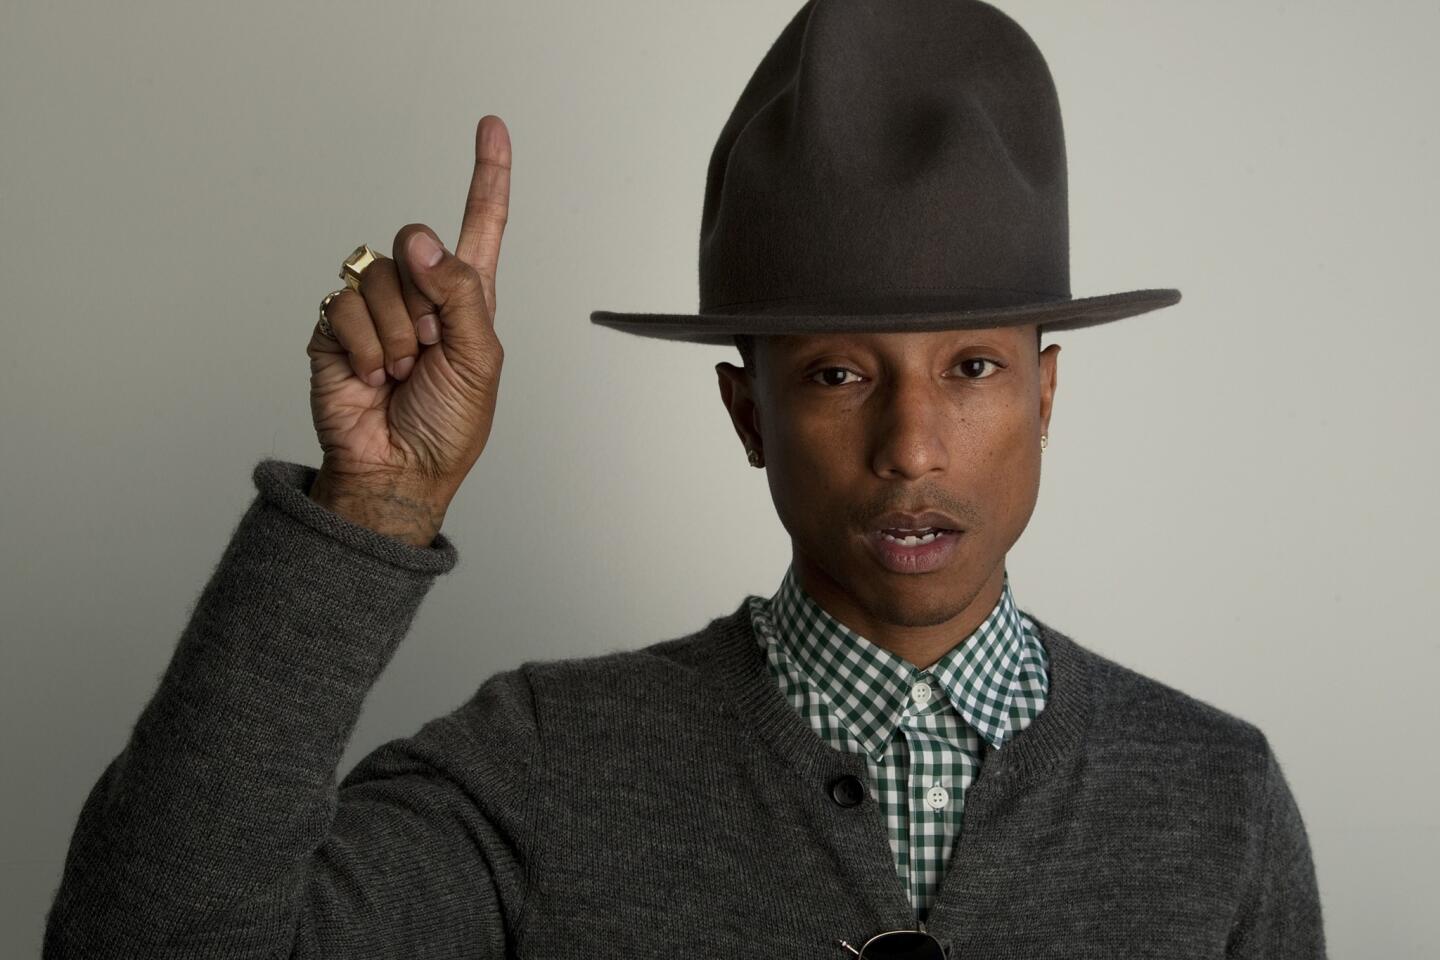 The questionable topper that stole much of the attention at the Grammy Awards can now be yours, if you can pull together several grand before March 2. Pharrell Williams put the Vivienne Westwood hat up for sale on EBay, where eager bidders had upped the price to more than $11,000 on Friday, the first day of a 10-day auction. Proceeds go to his charity, From One Hand to Another.